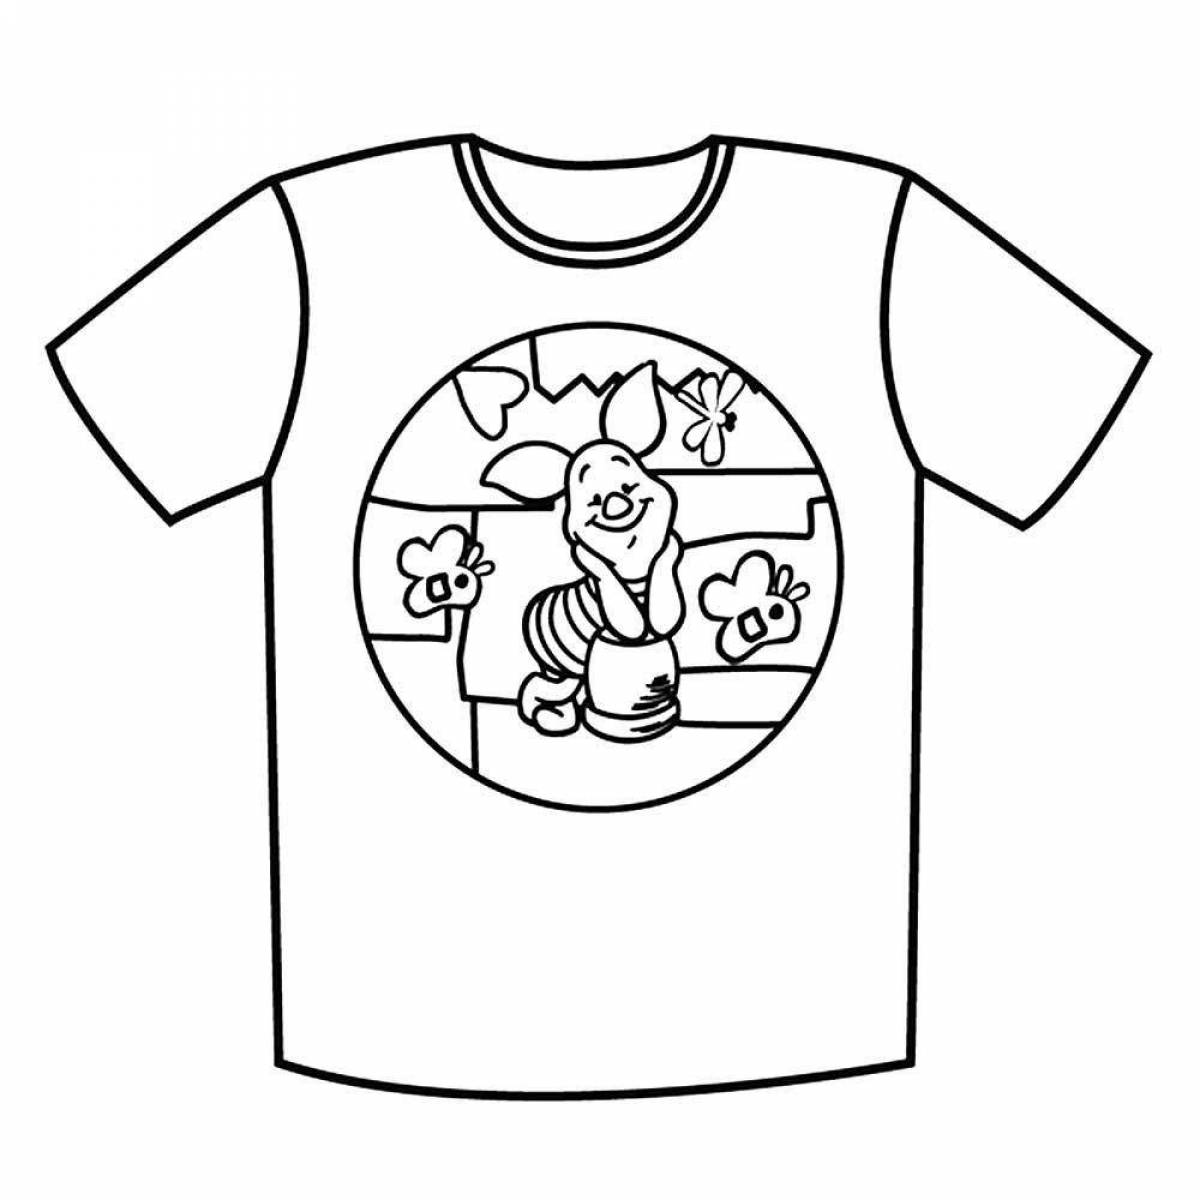 Colorful t-shirt coloring page for kids to develop skills